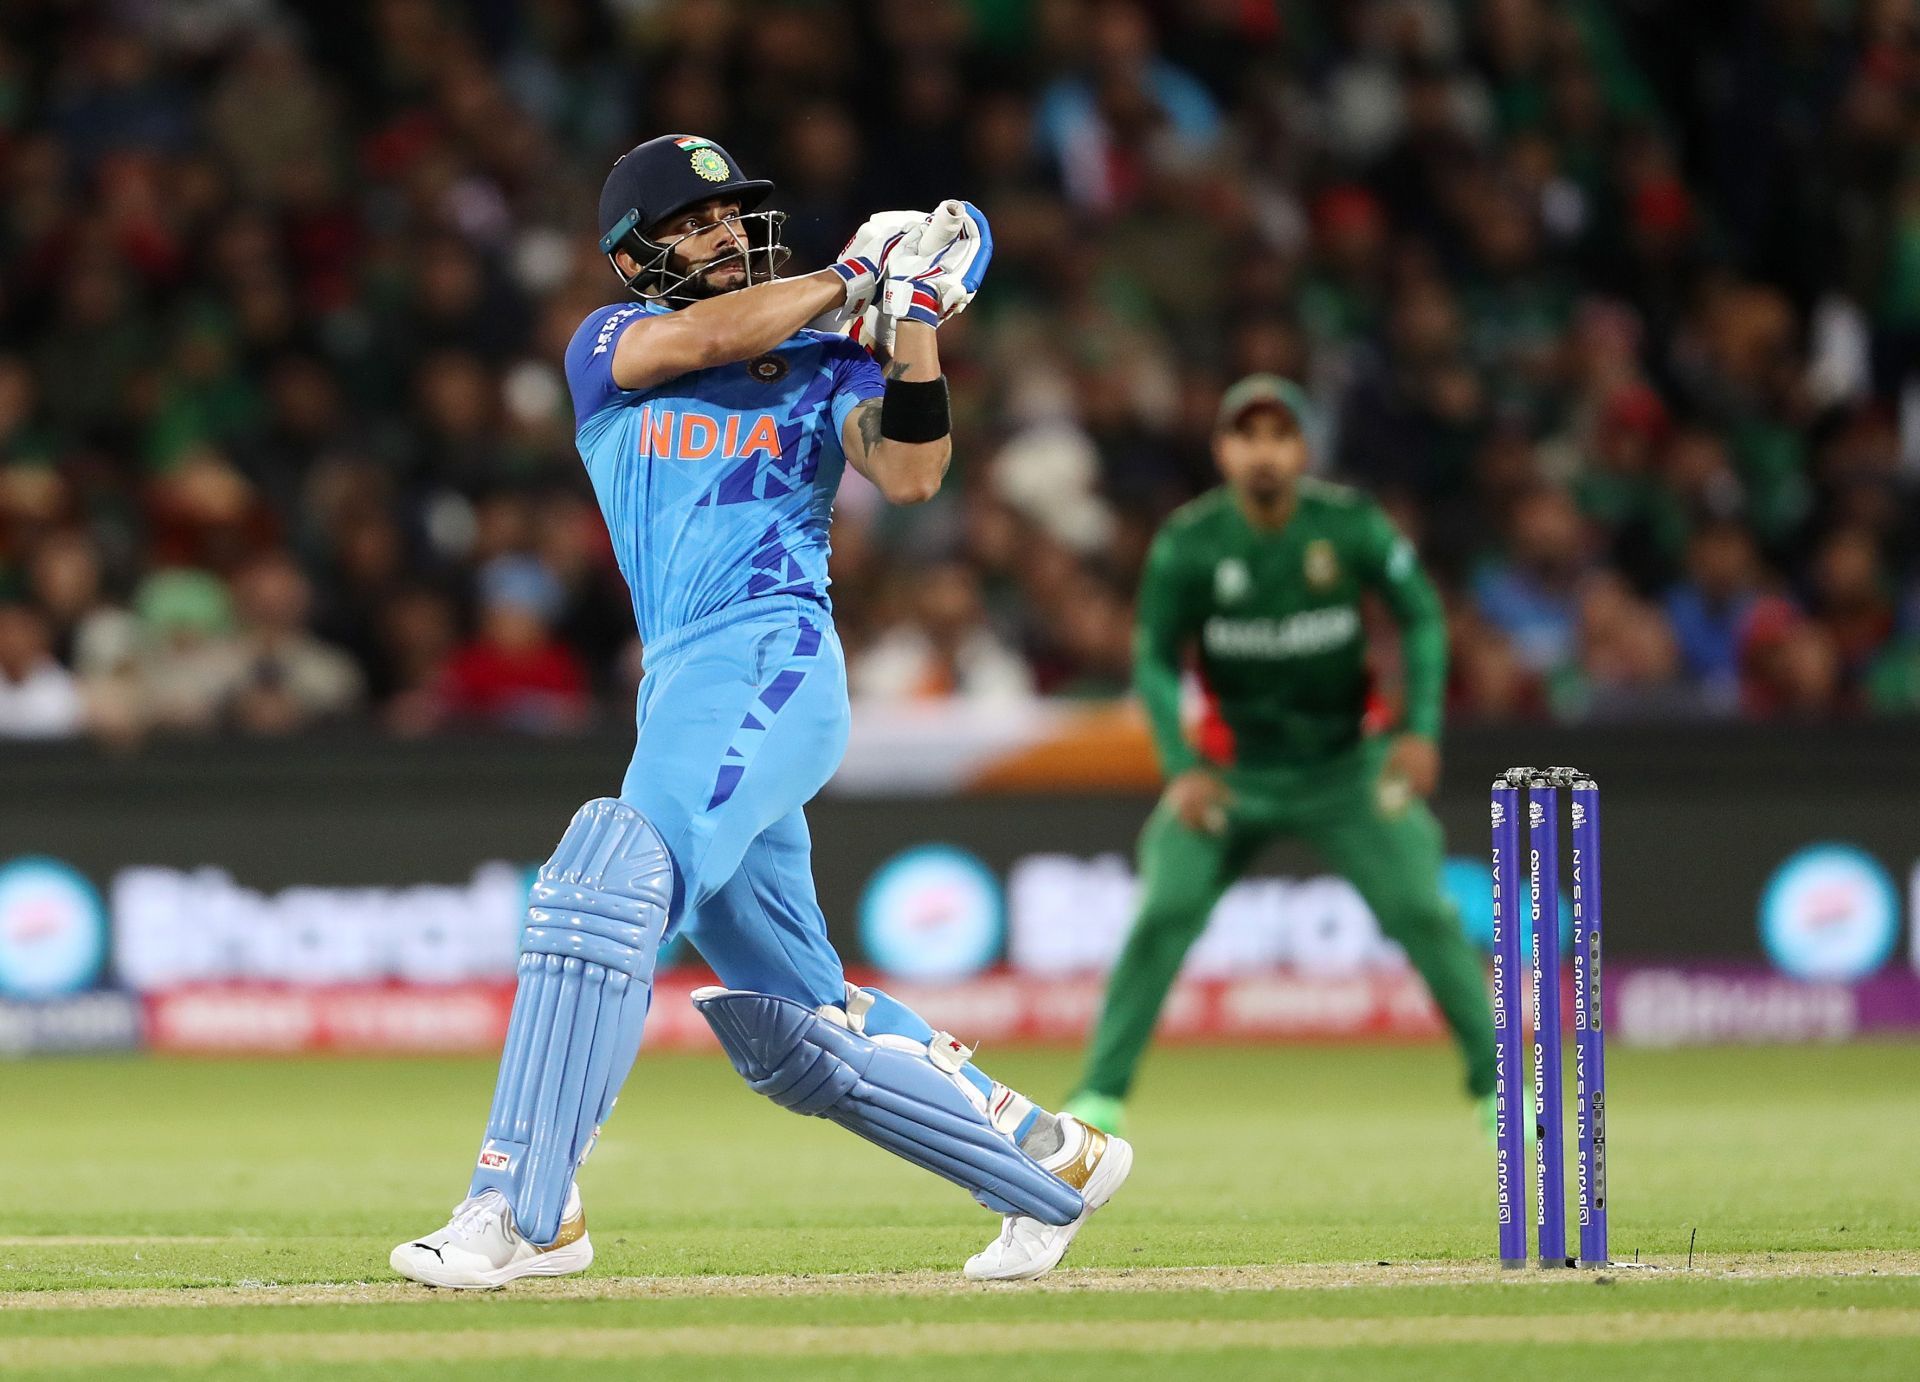 A total of 13 sixes were struck in the India-Bangladesh game at the Adelaide Oval.